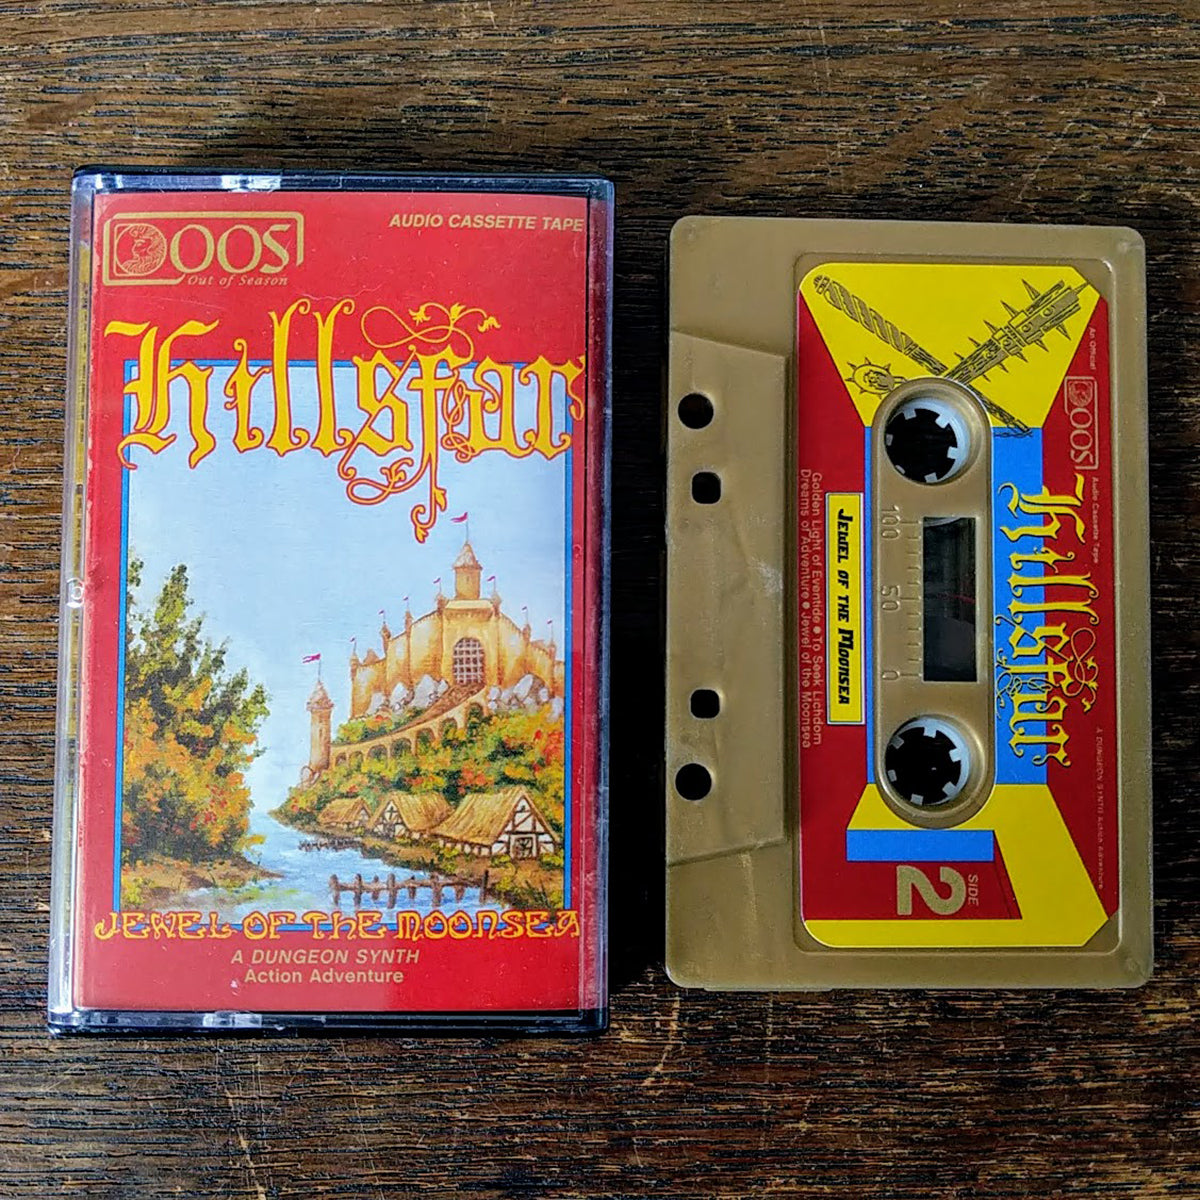 [SOLD OUT] HILLSFAR "Jewel of the Moonsea" Cassette Tape (2nd edition)